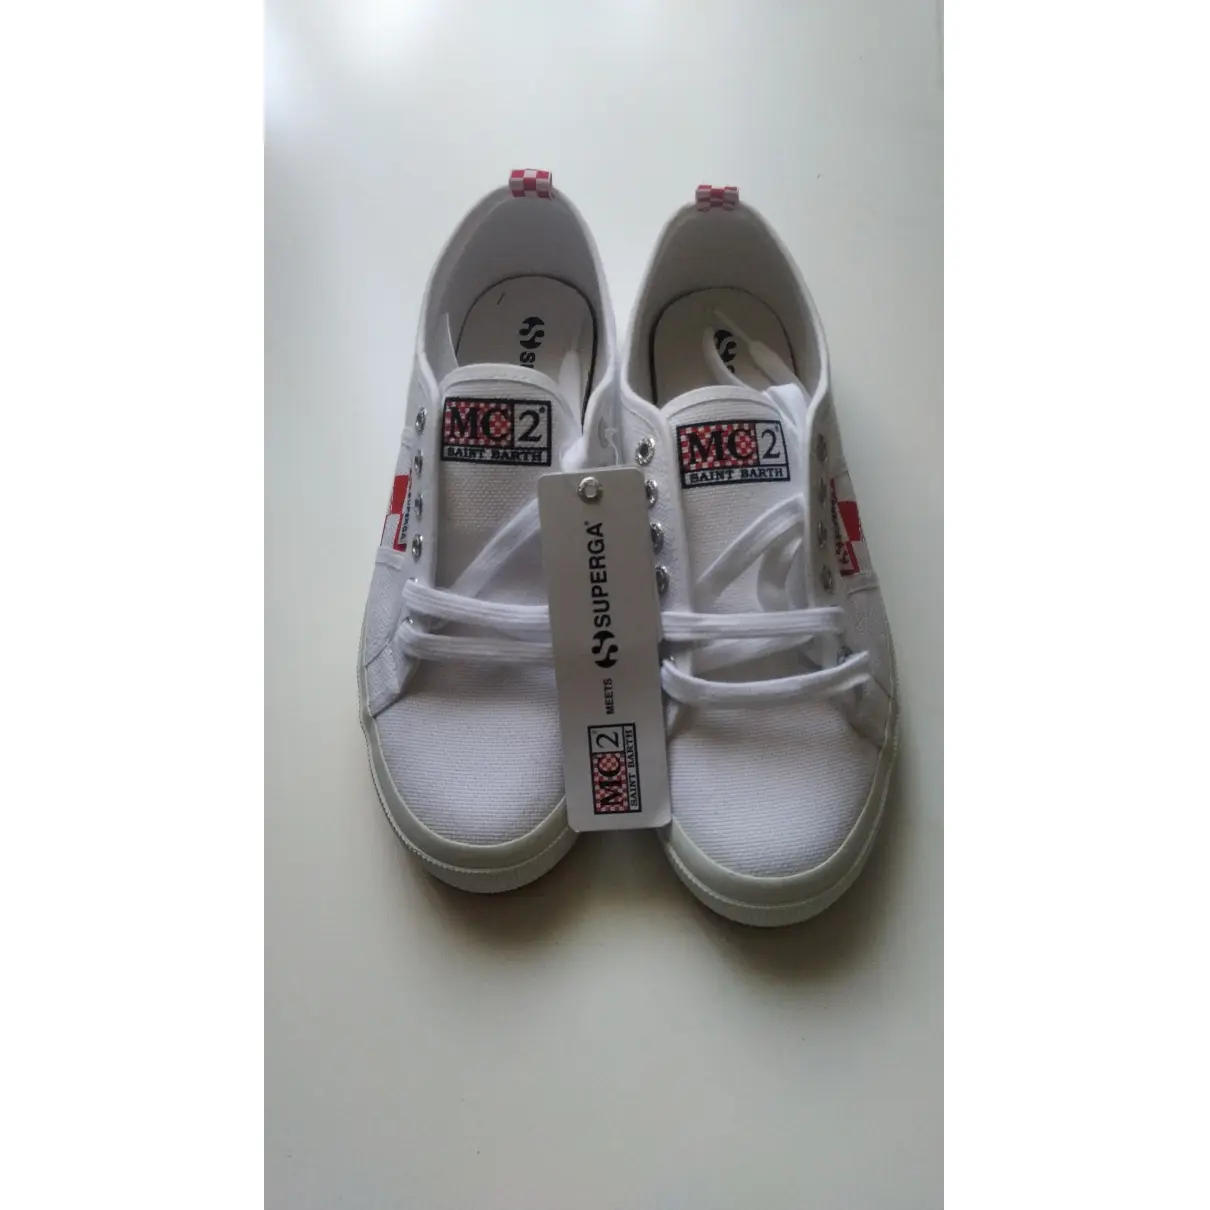 Buy Superga Cloth trainers online